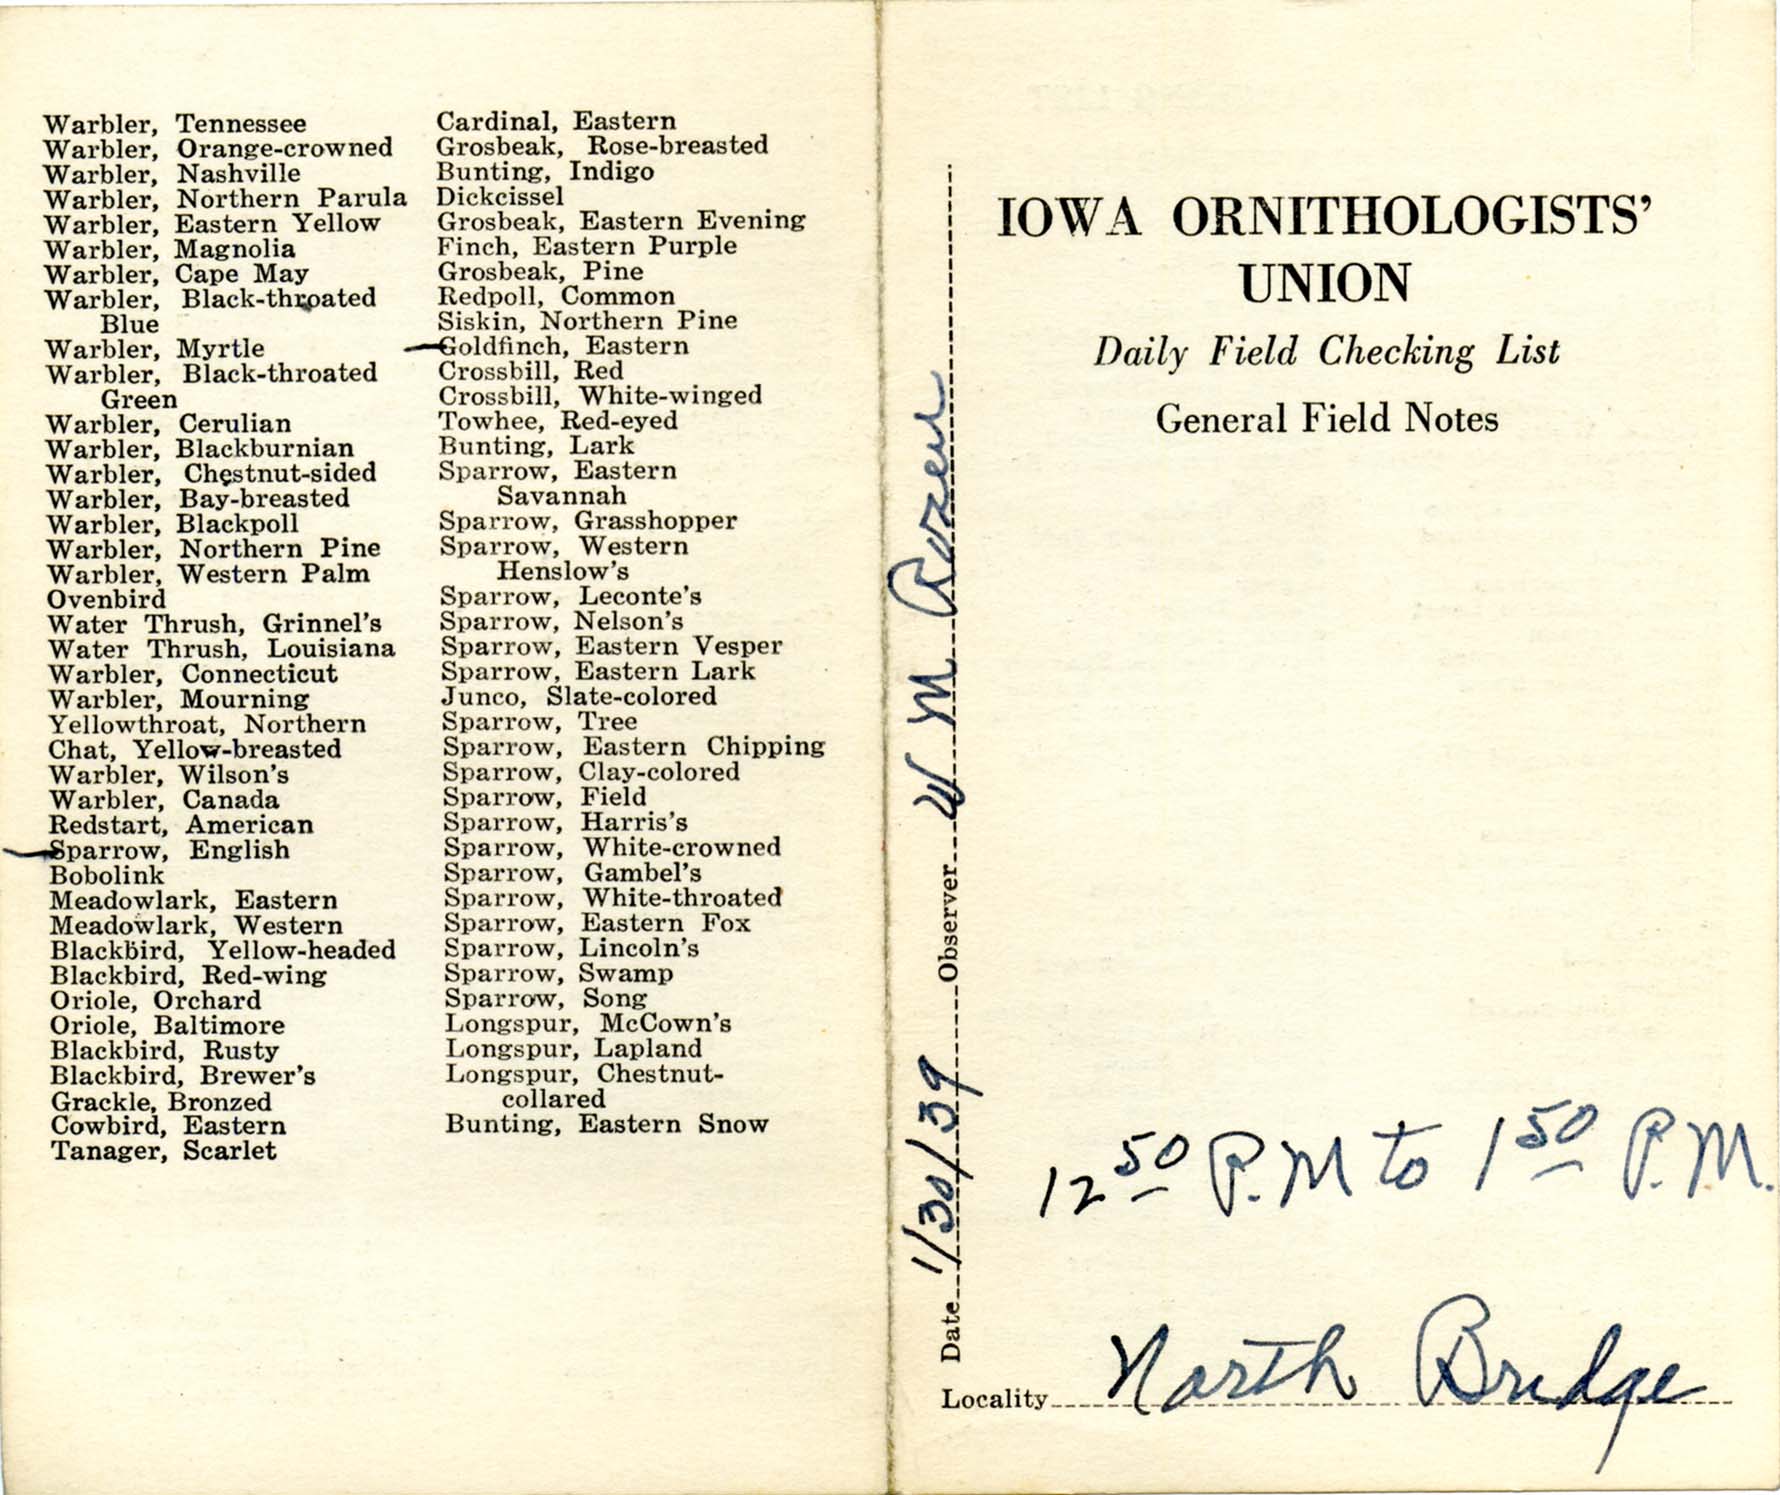 Daily field checking list by Walter Rosene, January 30, 1939